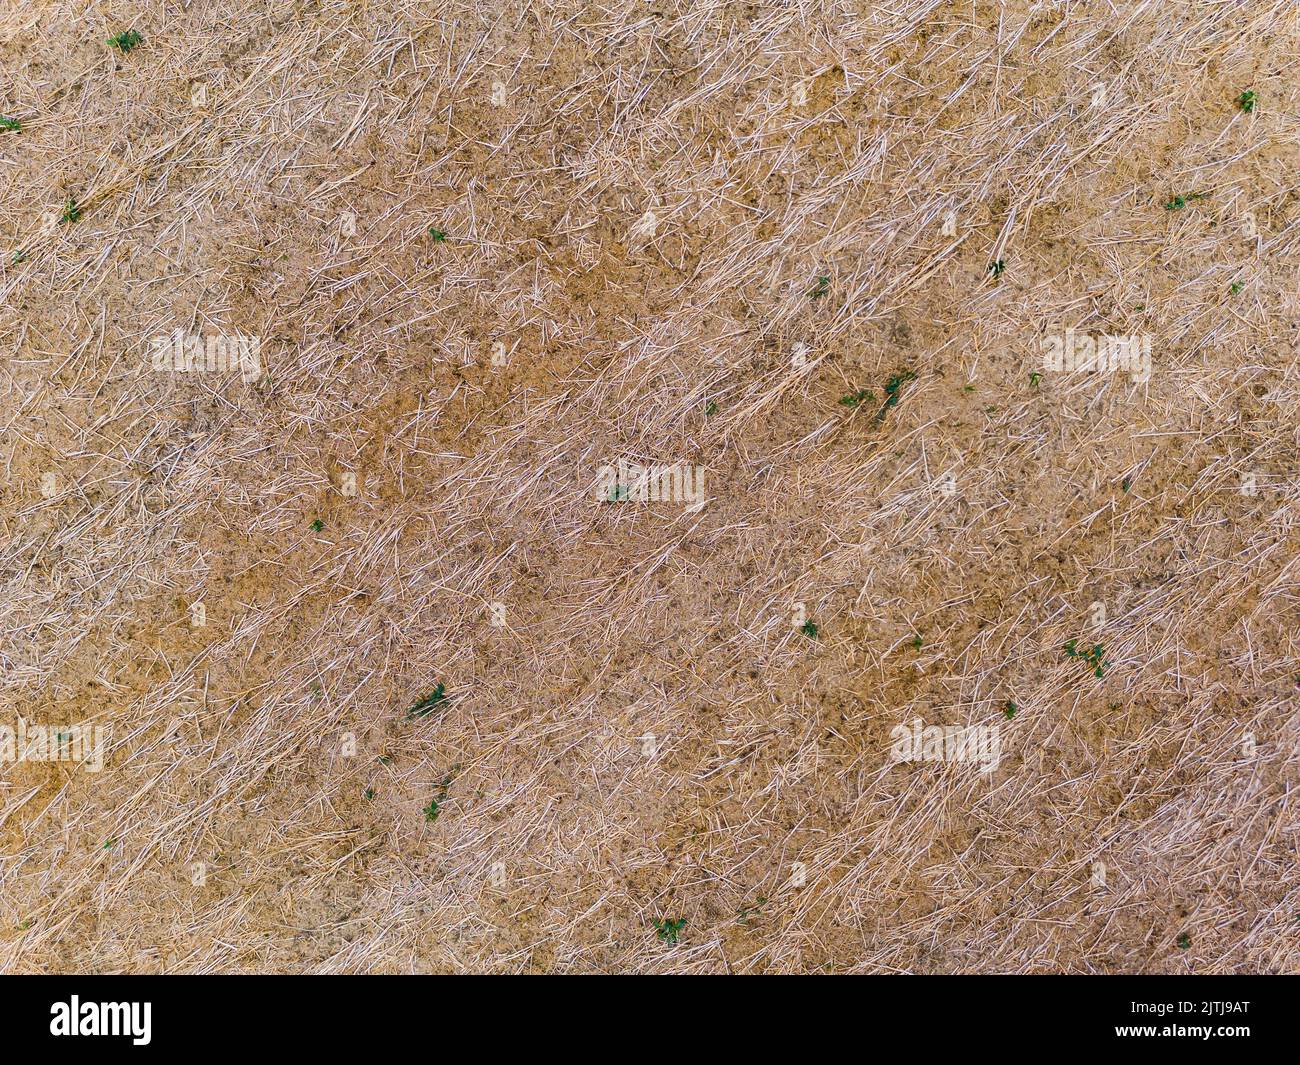 Dry stubble field with dead stubble in field from drone perspective Stock Photo